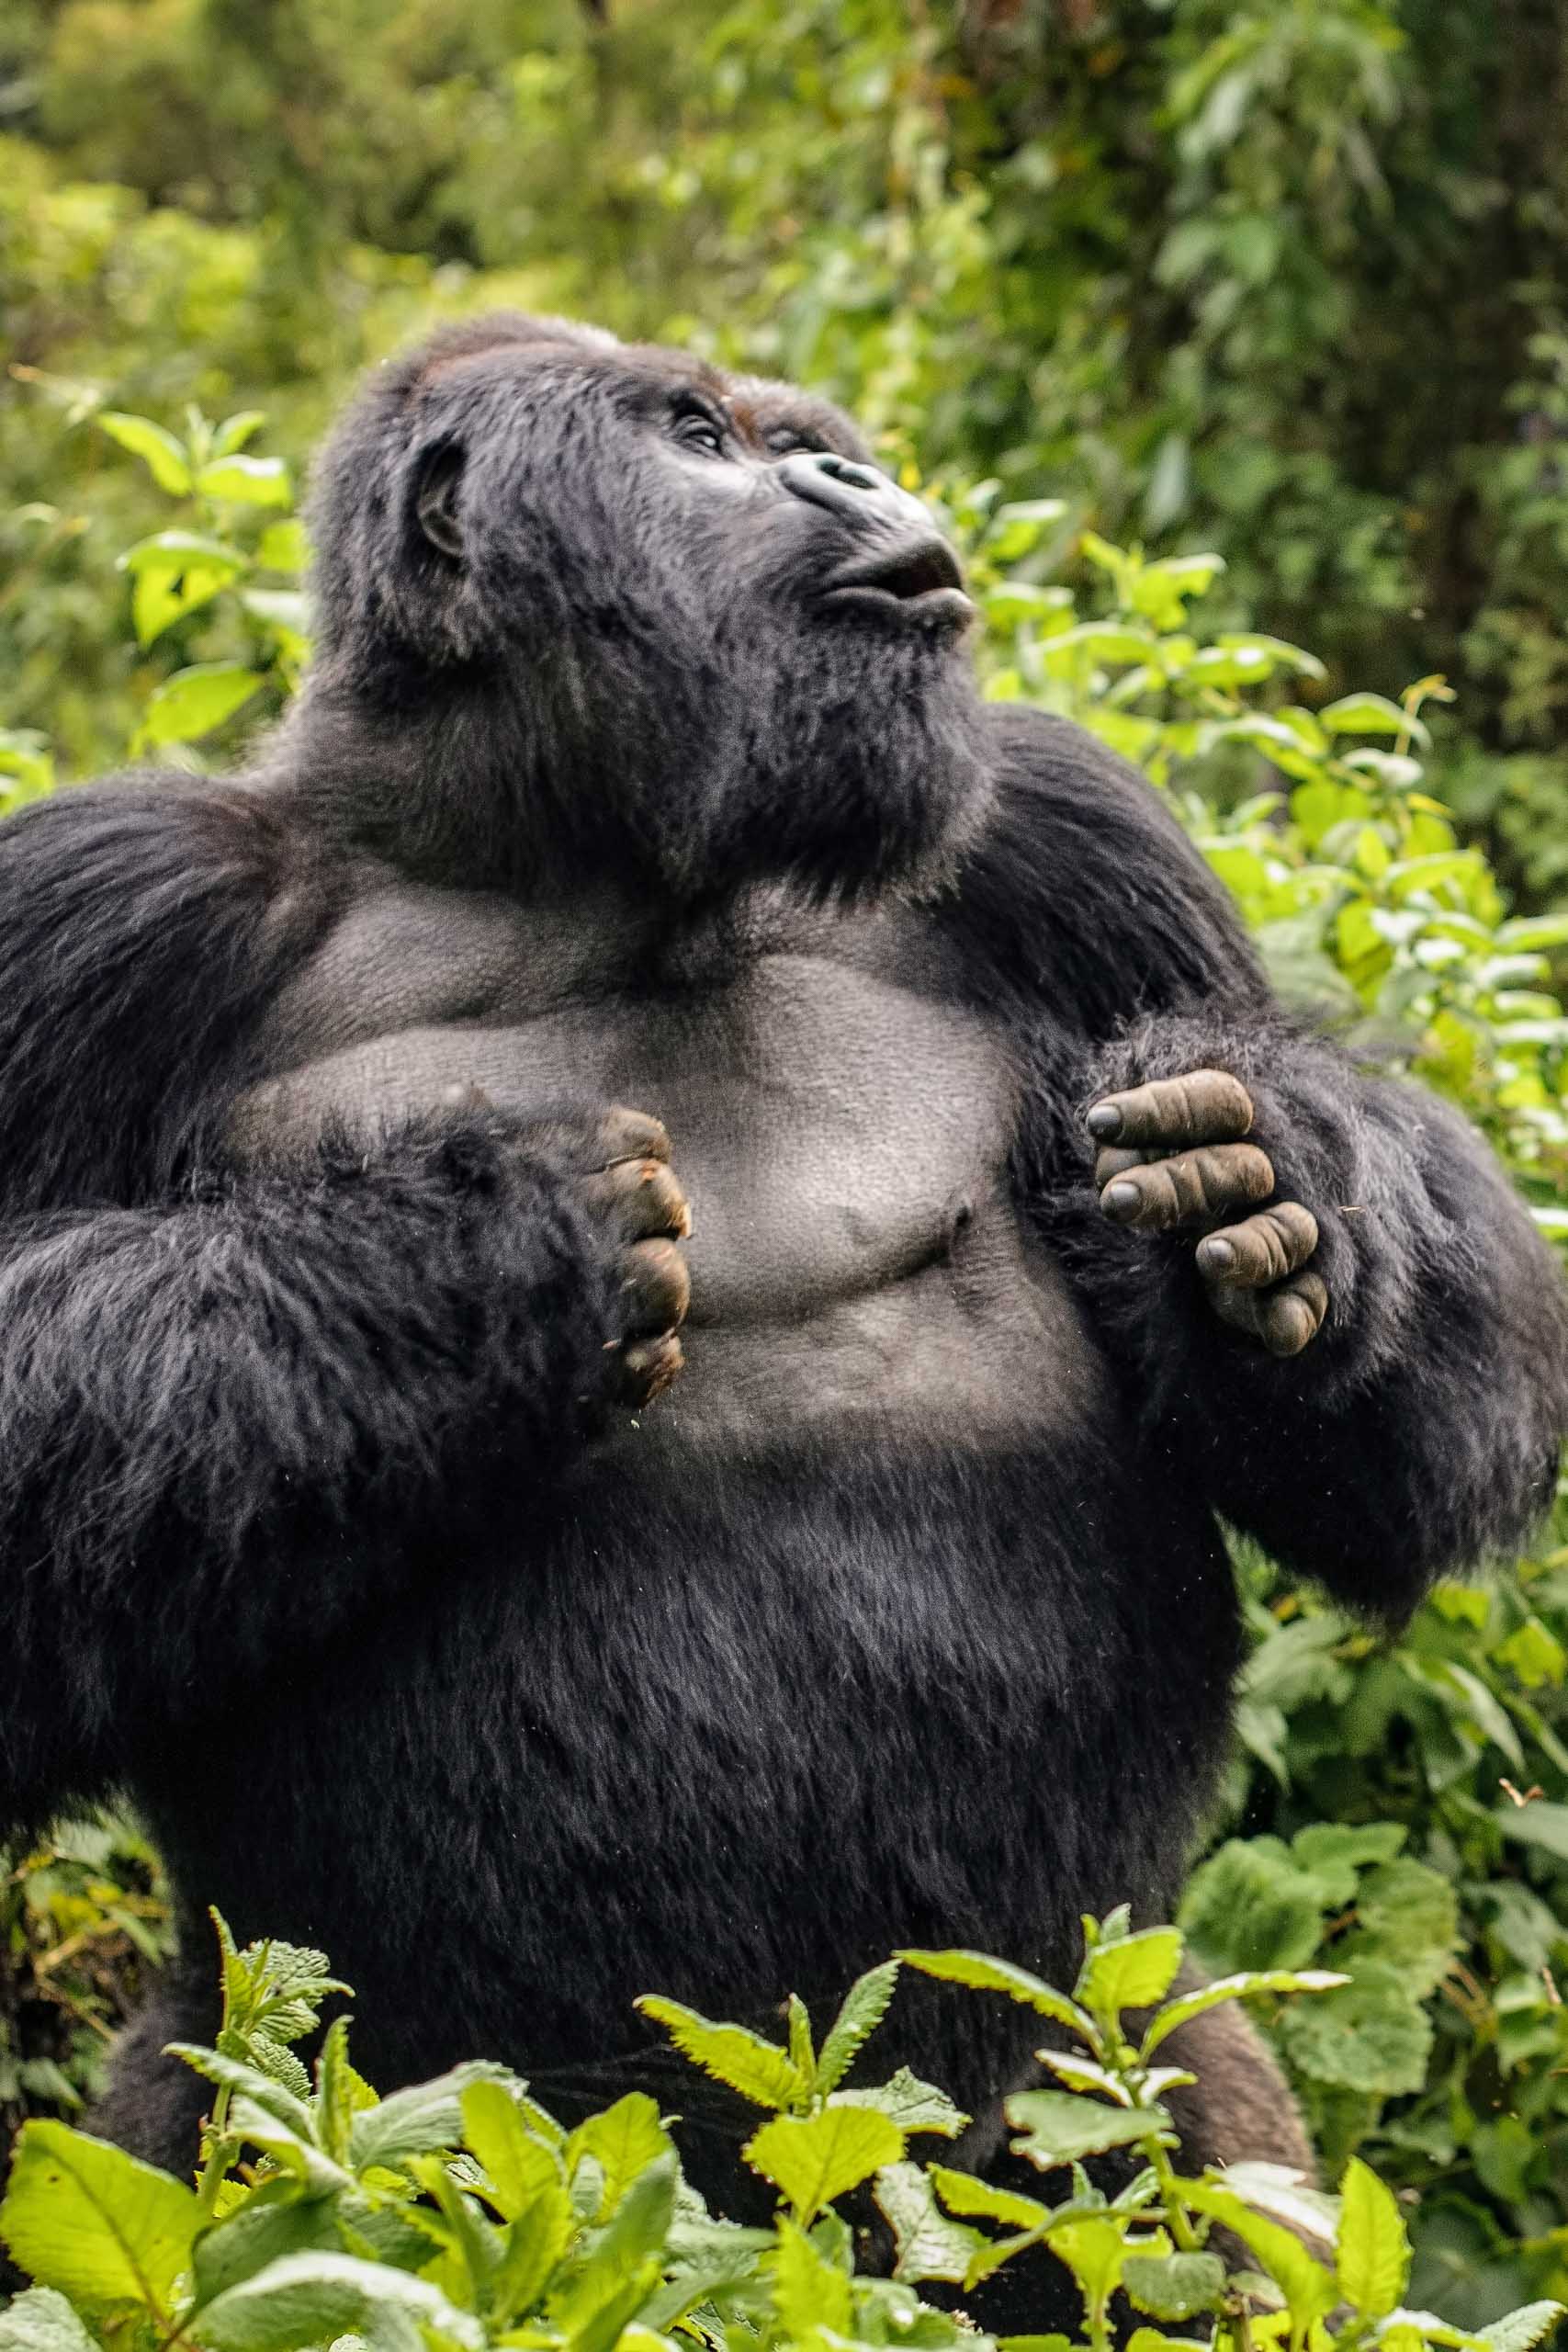 A gorilla in a forest.